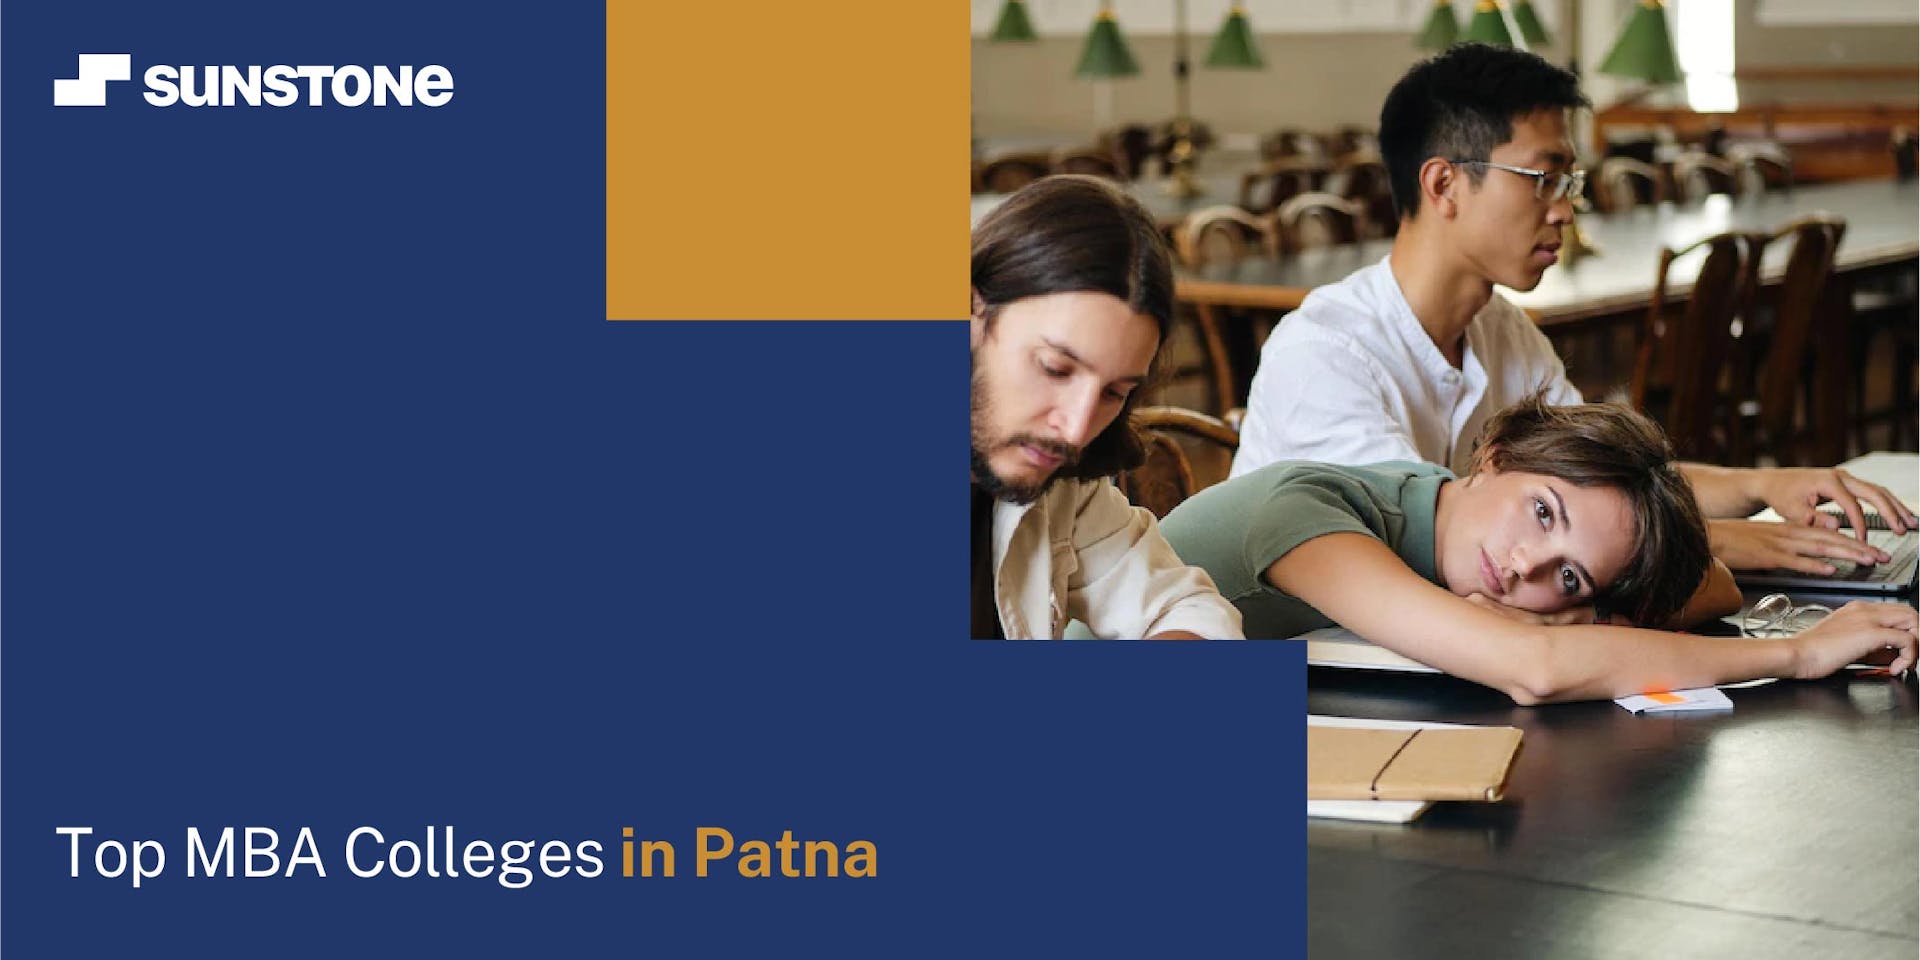 Best MBA Colleges in Patna